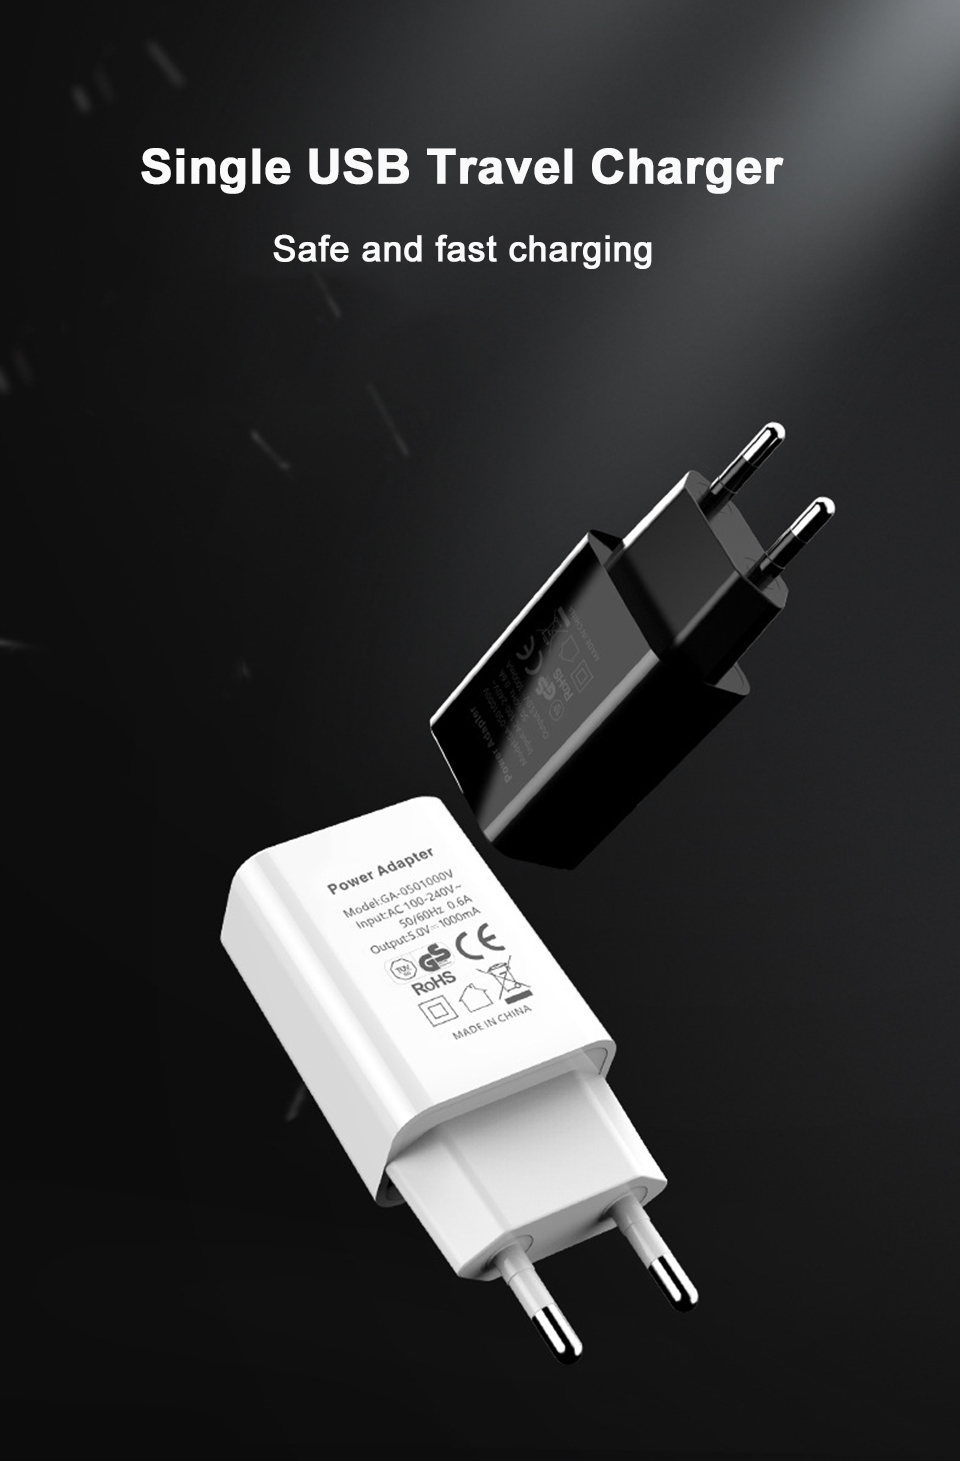 Bakeey-Mini-Adapter-5V-1A-Travel-Wall-USB-Charger-for-Samsung-Galaxy-S21-Note-S20-ultra-Huawei-Mate4-1853156-1